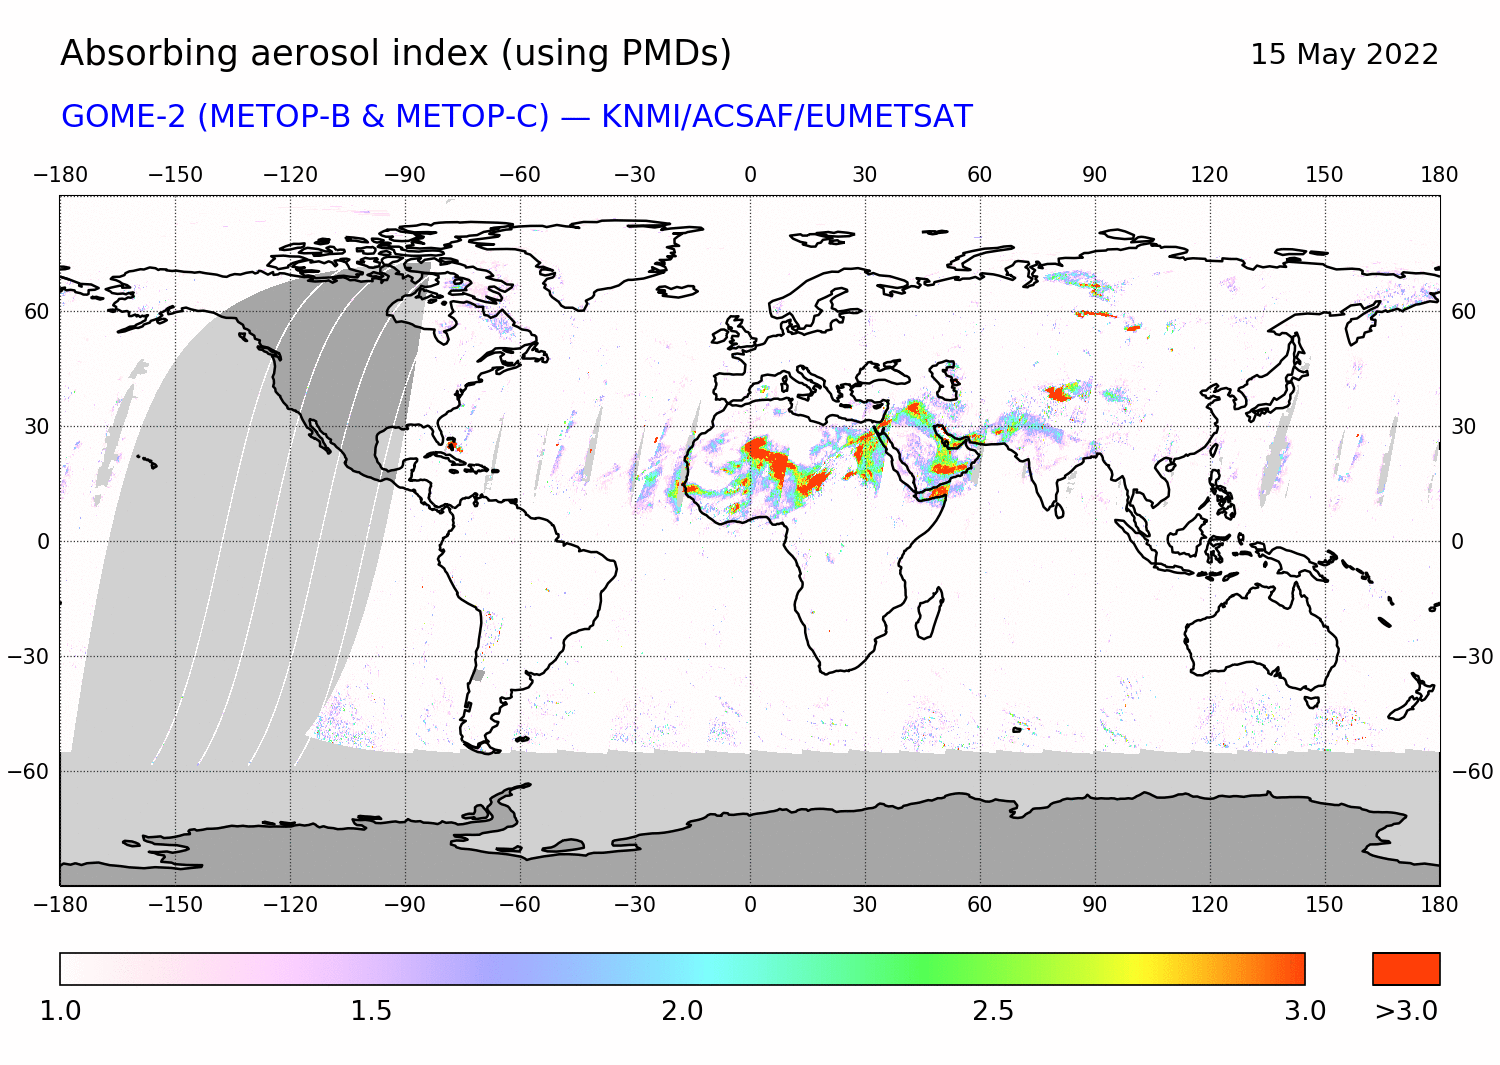 GOME-2 - Absorbing aerosol index of 15 May 2022